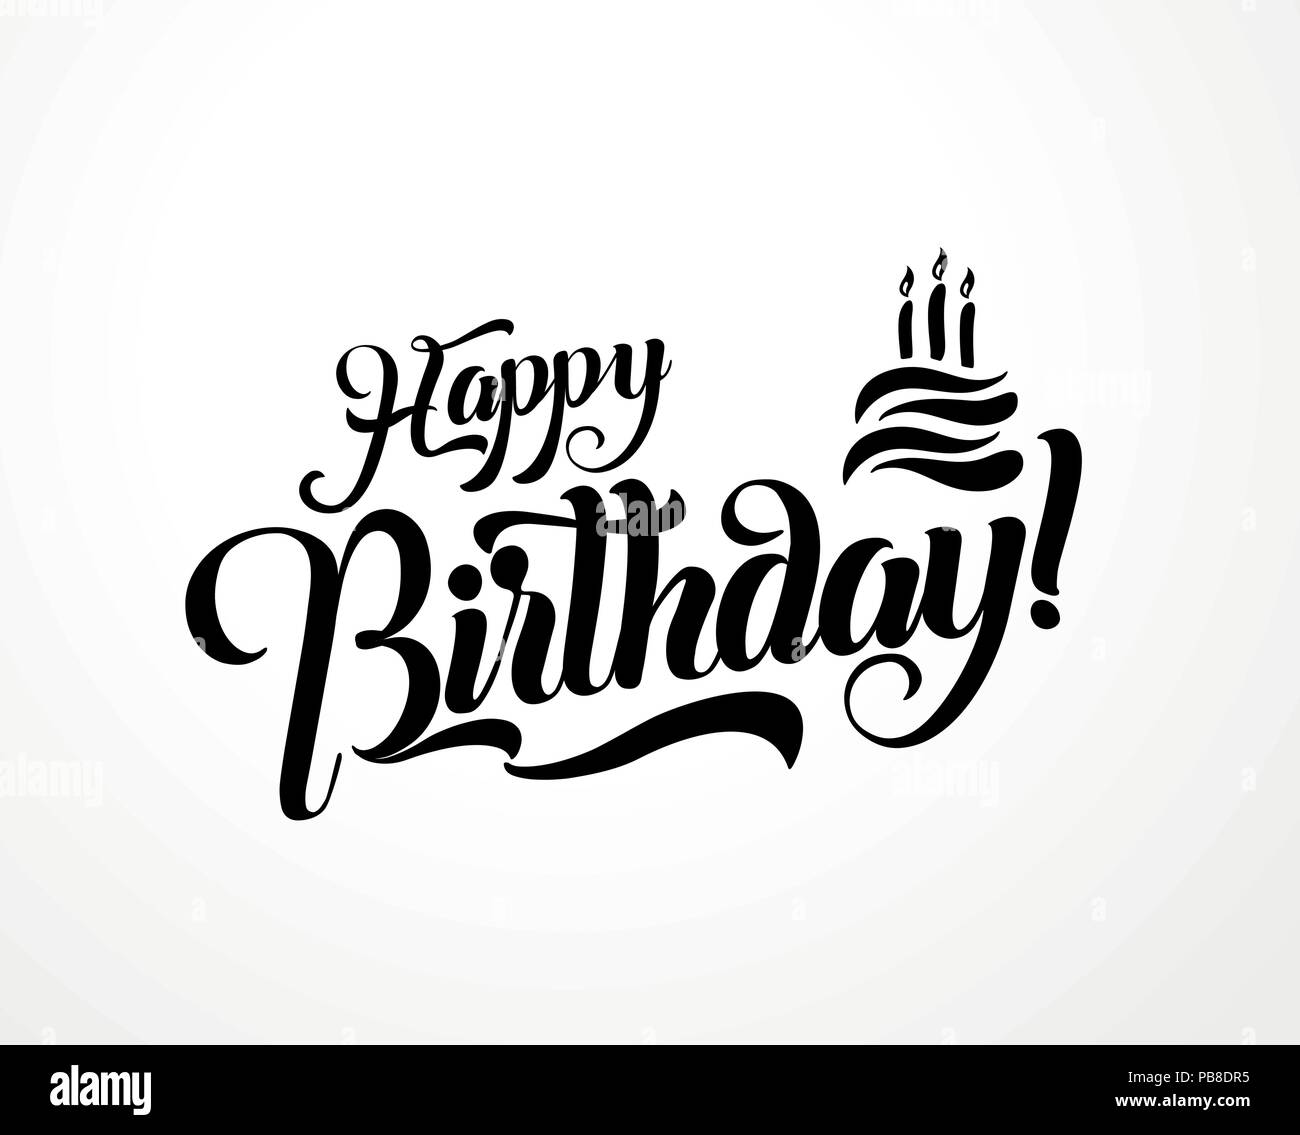 Download Happy birthday lettering text vector illustration ...